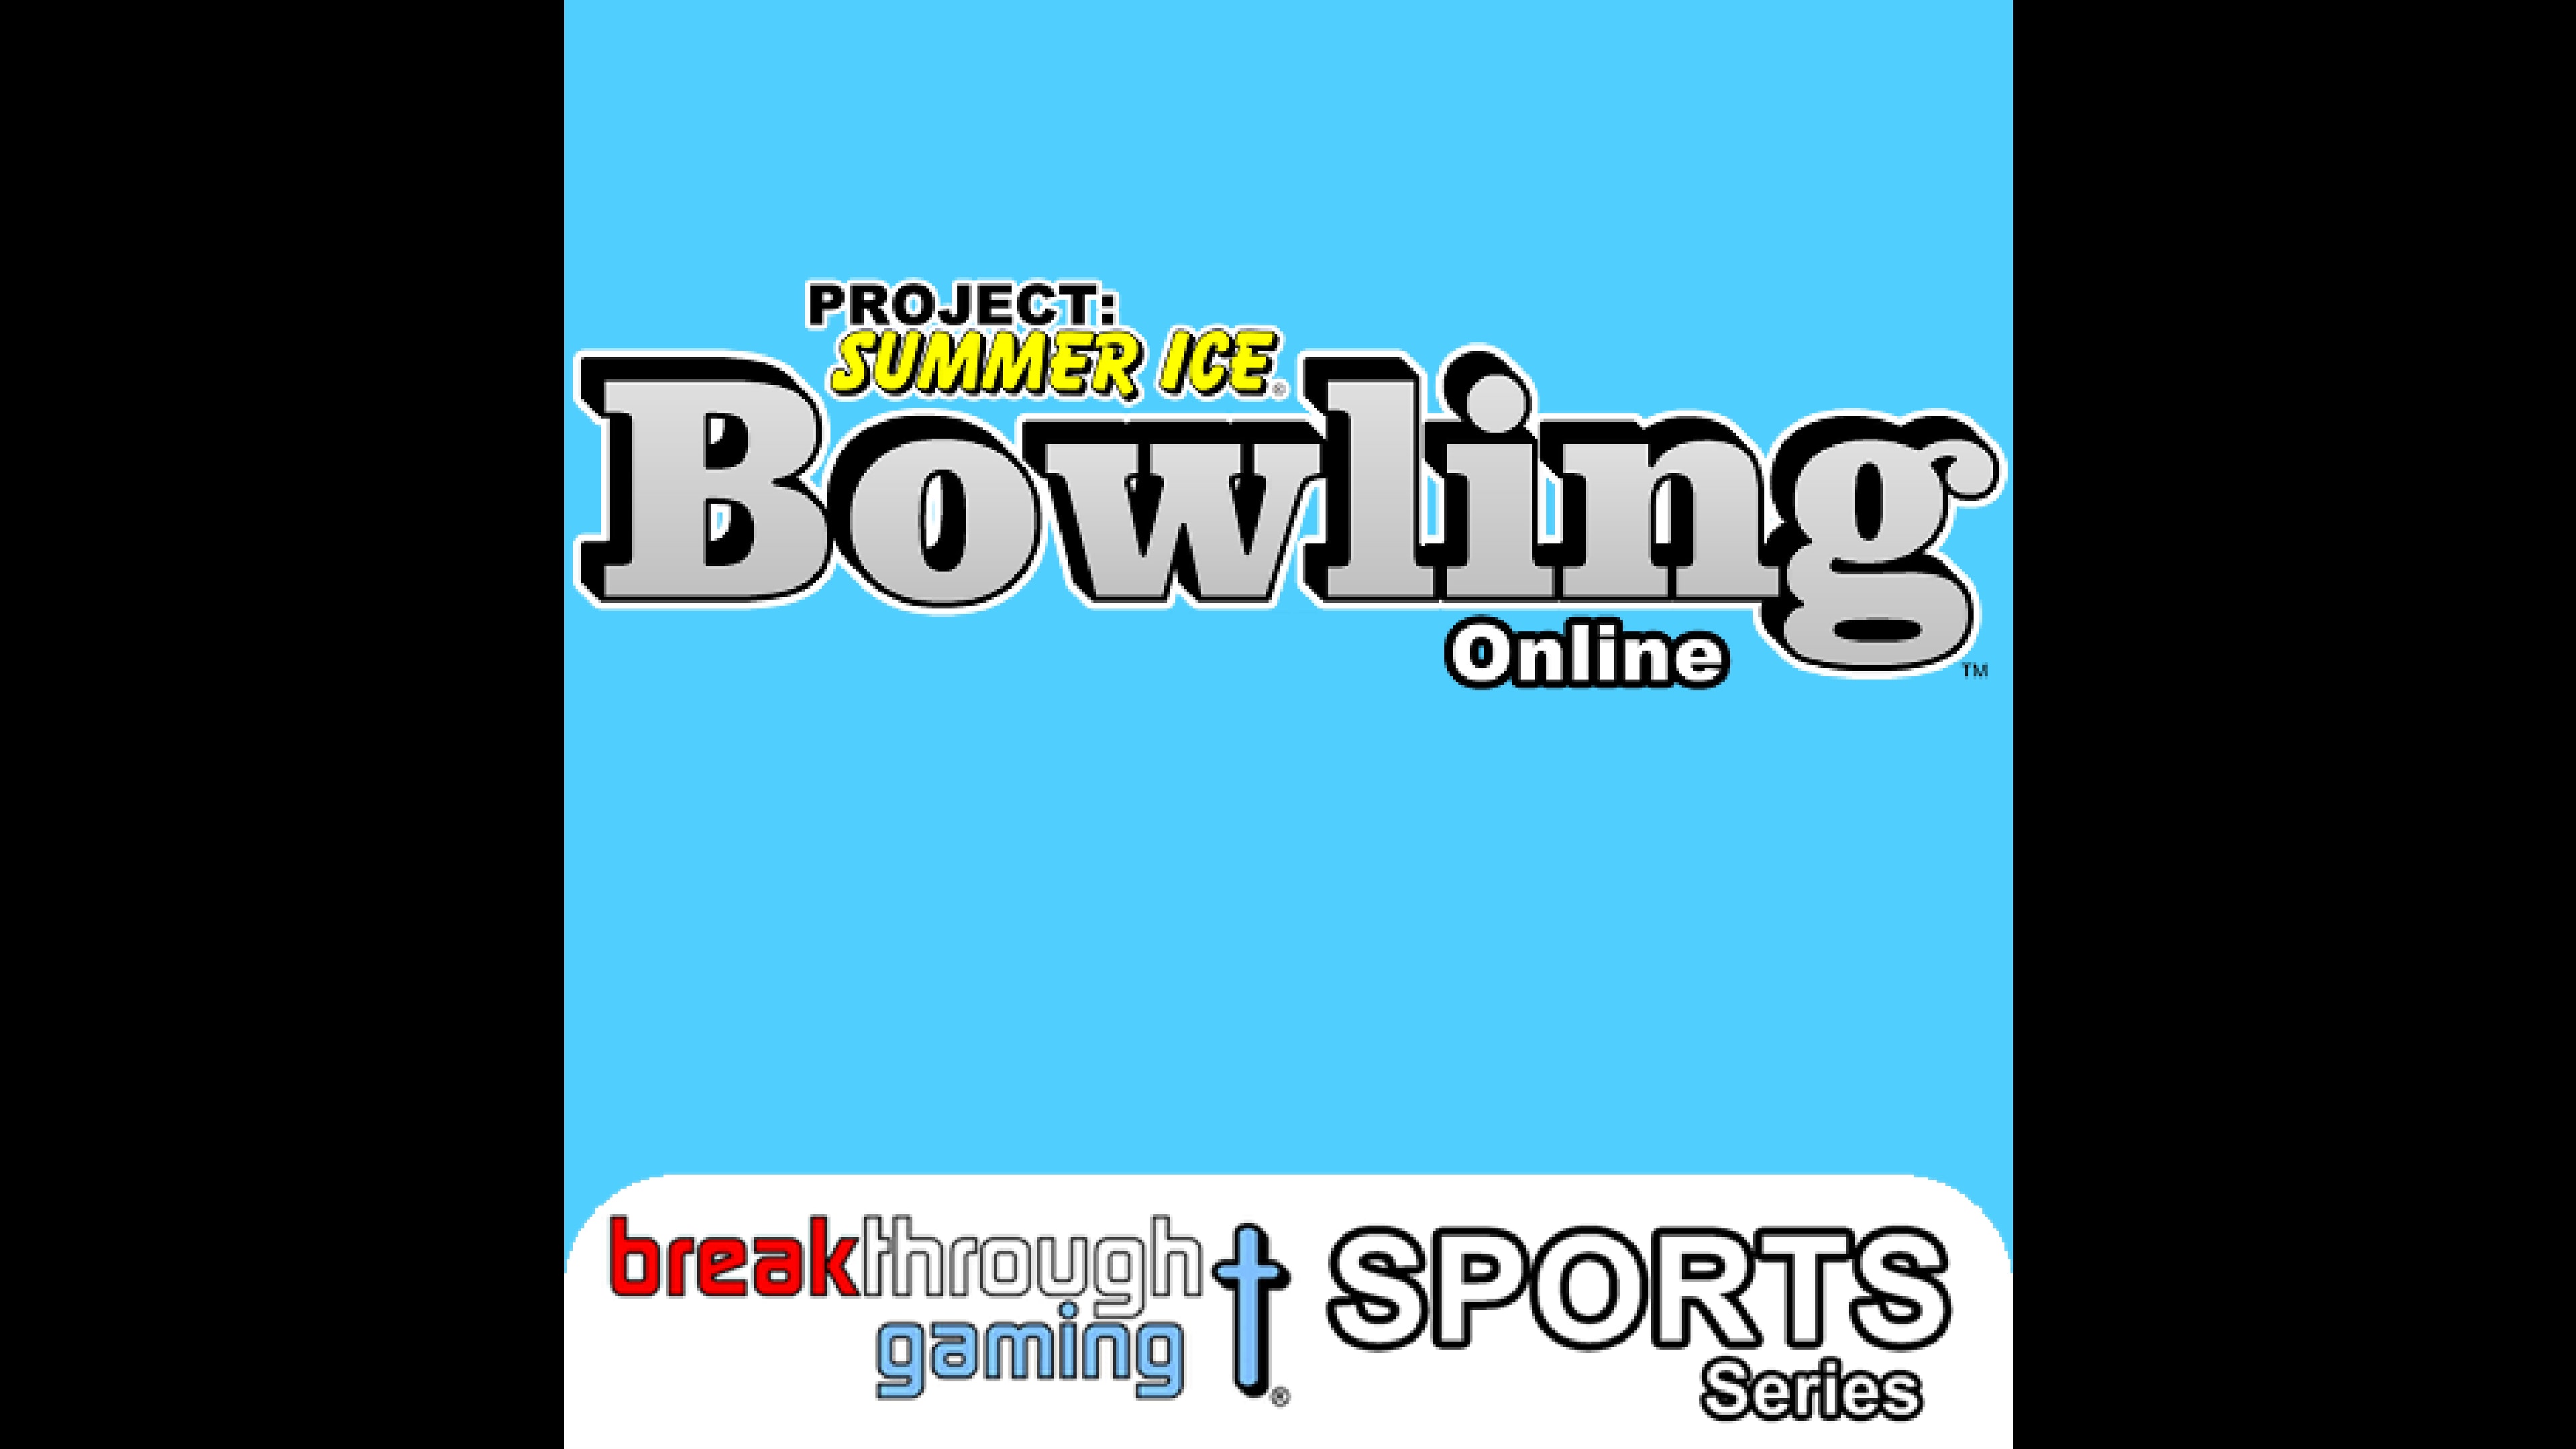 Project Summer Ice Bowling Online